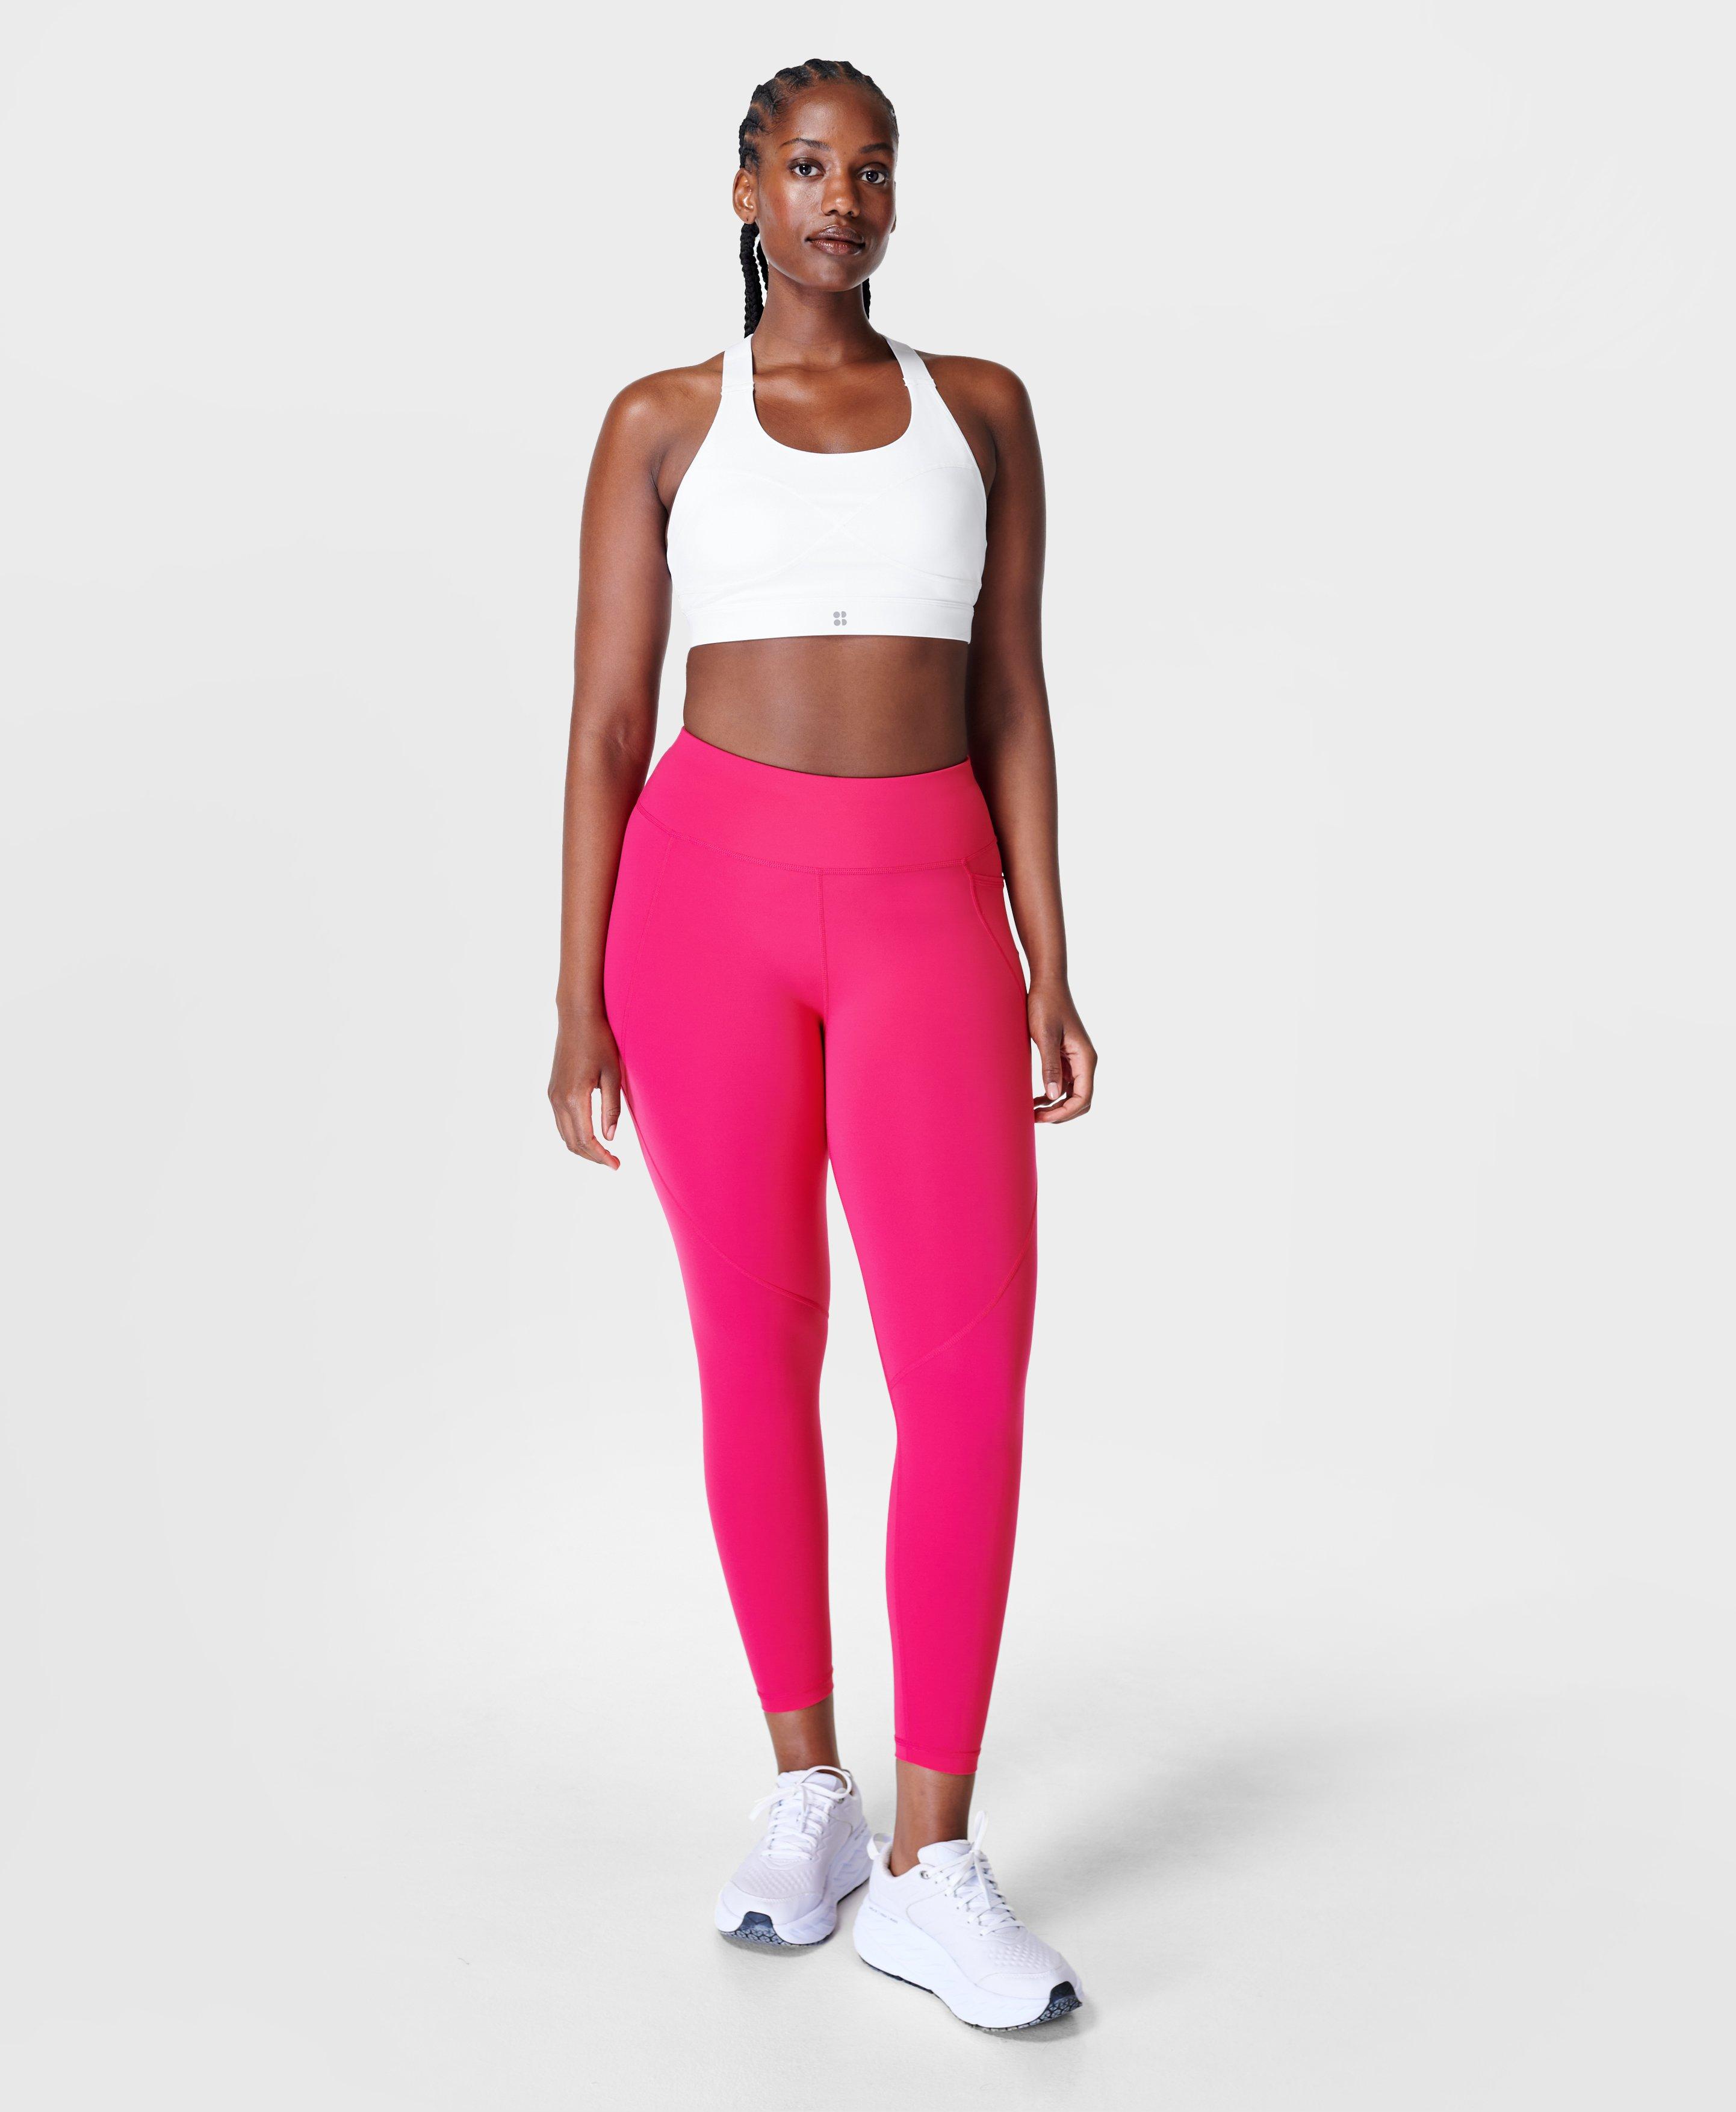 Imse Vimse Leakproof Workout Period Pants - Misty Rose